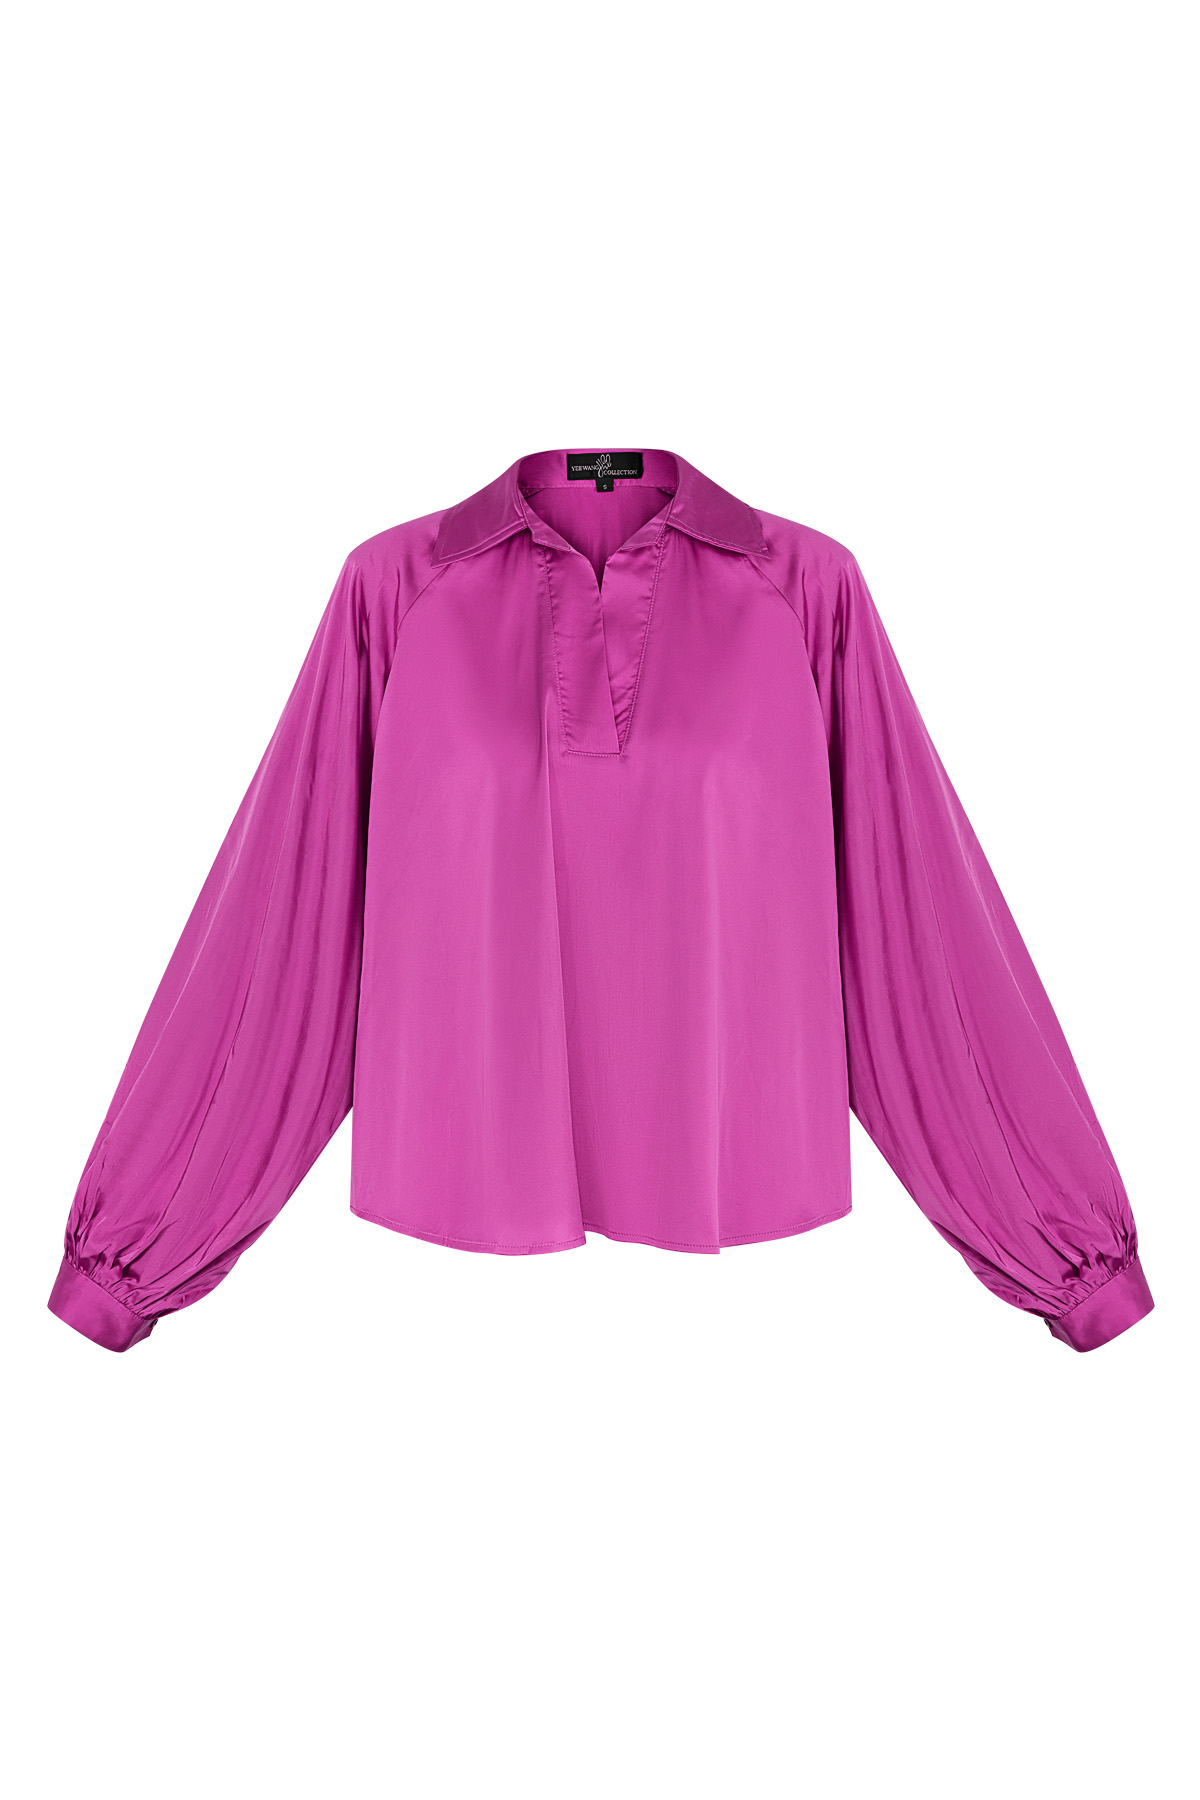 Blouse puffed sleeve pink 